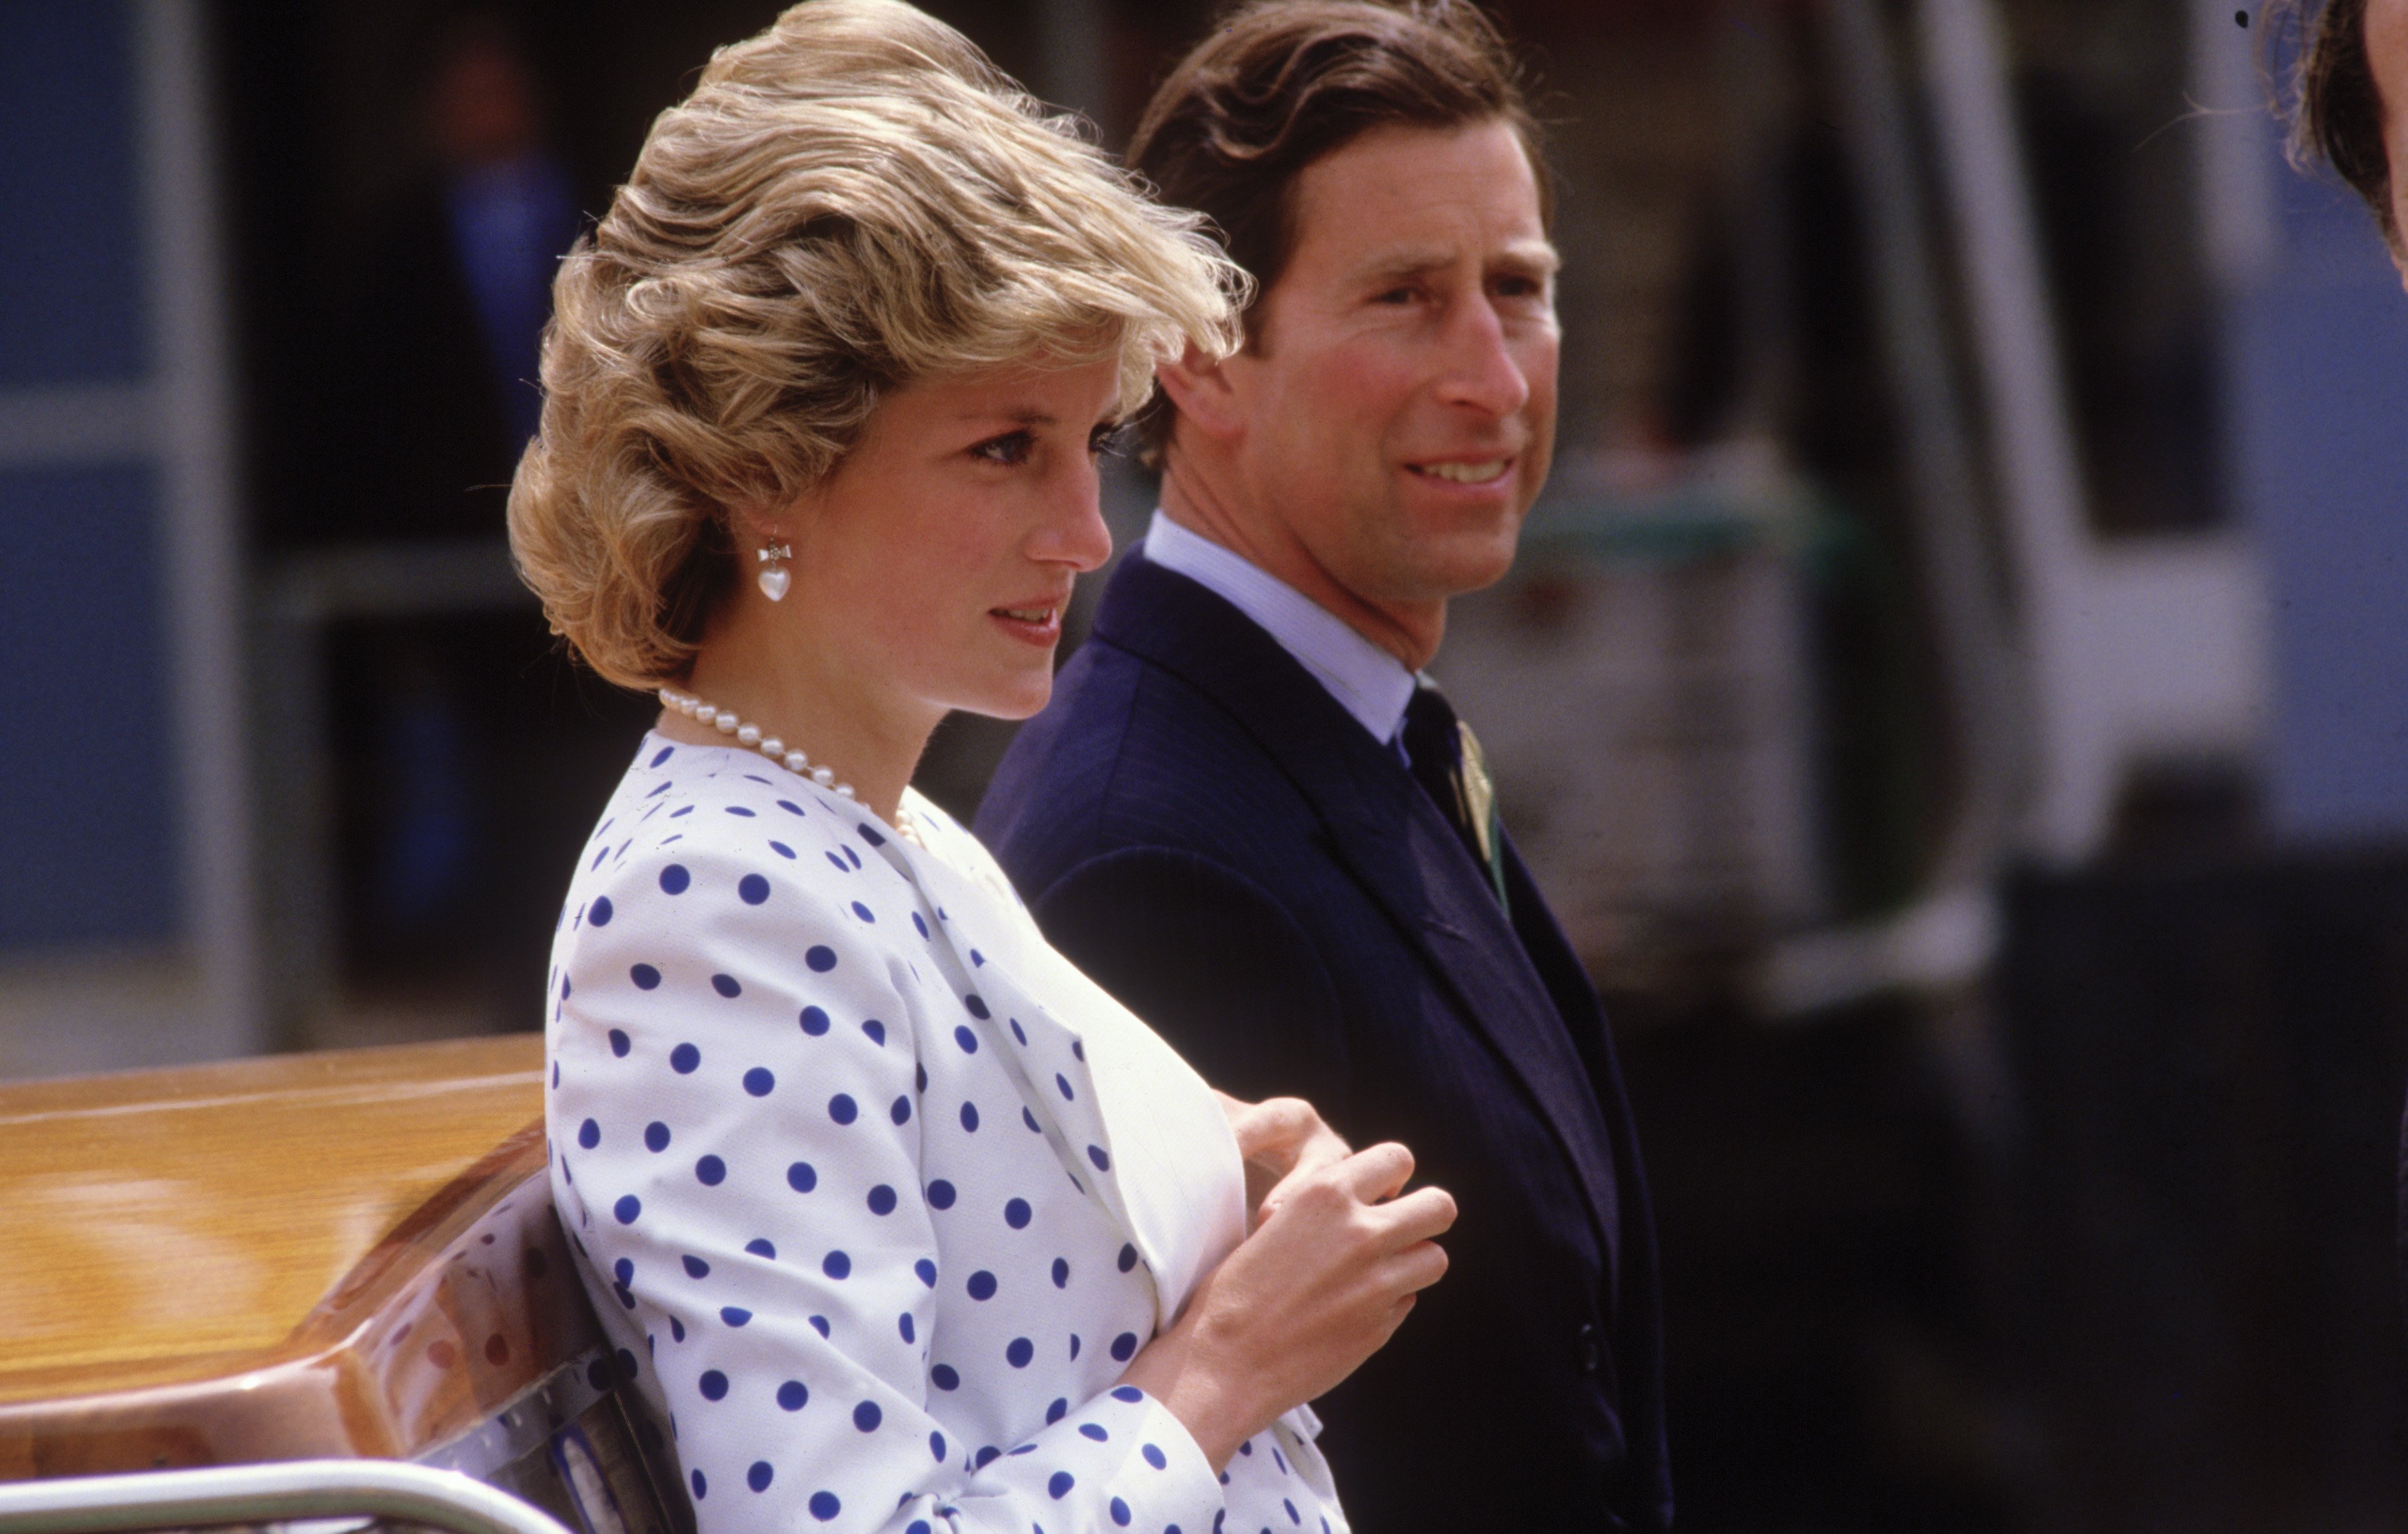 Diana Princess of Wales and Prince Charles travel by motor boat along the Grand Canal in Venice, Italy on May 4, 1985. | Source: Getty Images